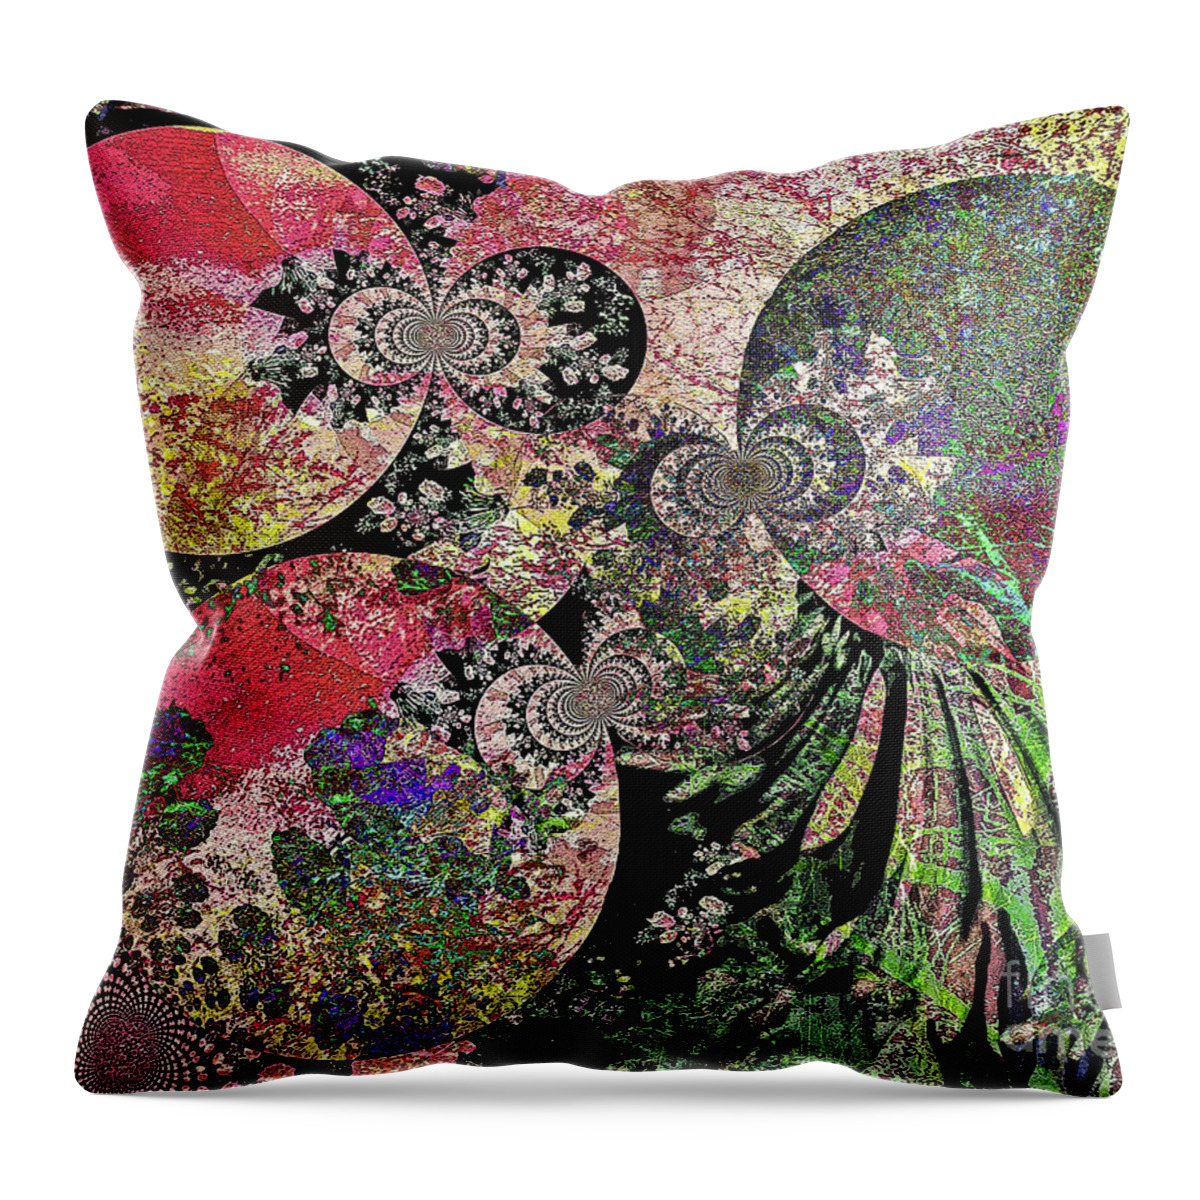 Shara Abel Throw Pillow featuring the photograph Transformation by Shara Abel